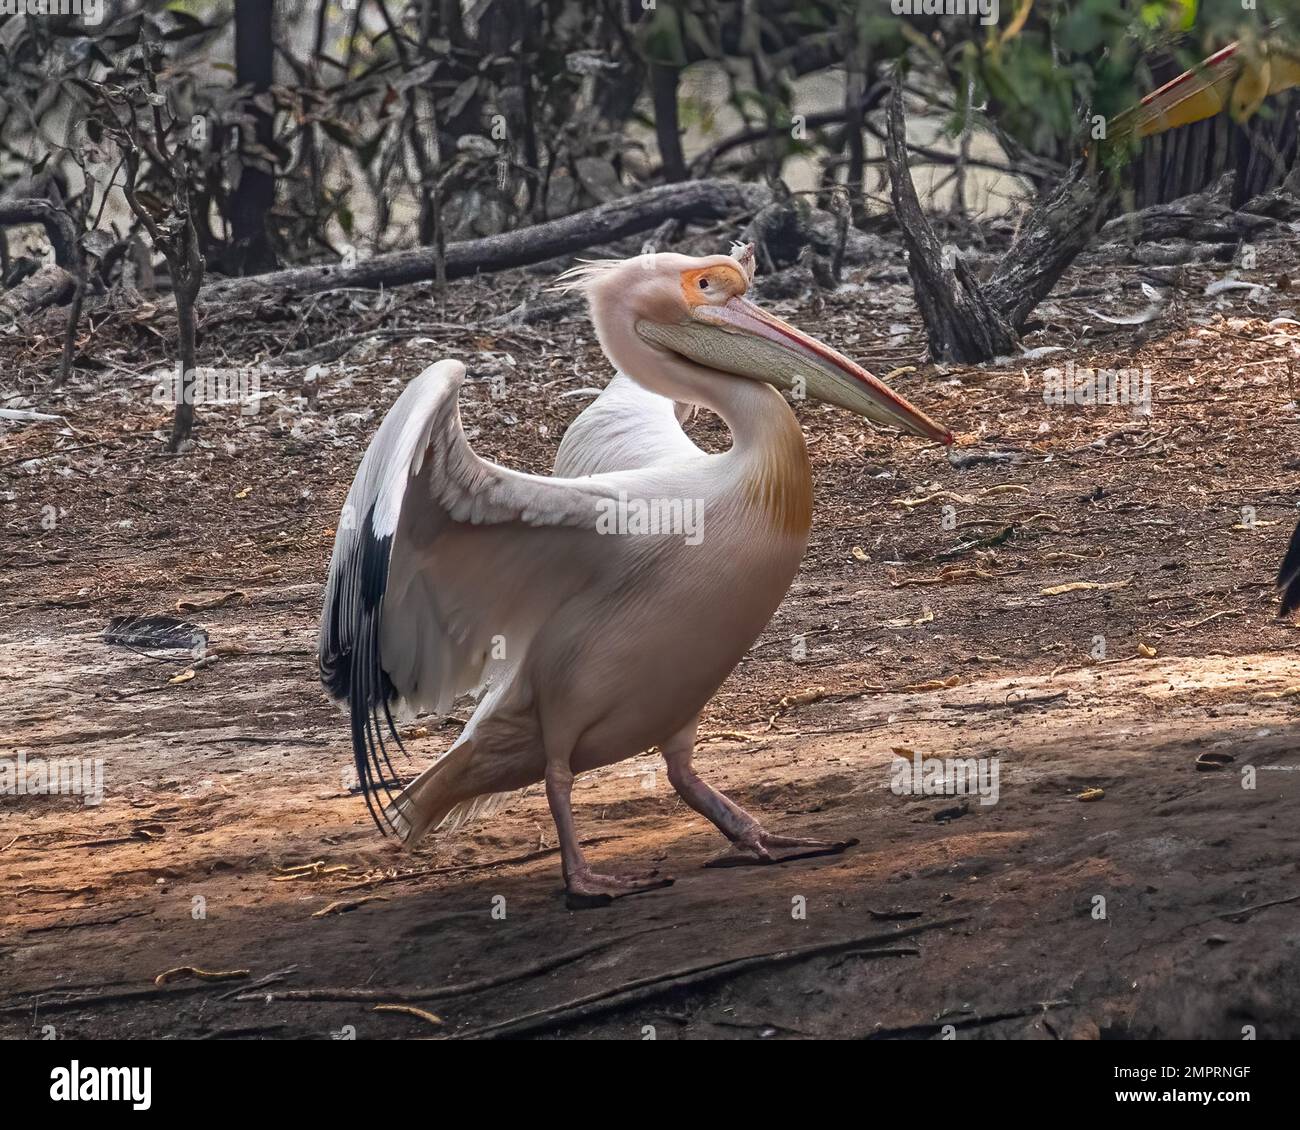 A dancing pink pelican on ground 2 Stock Photo